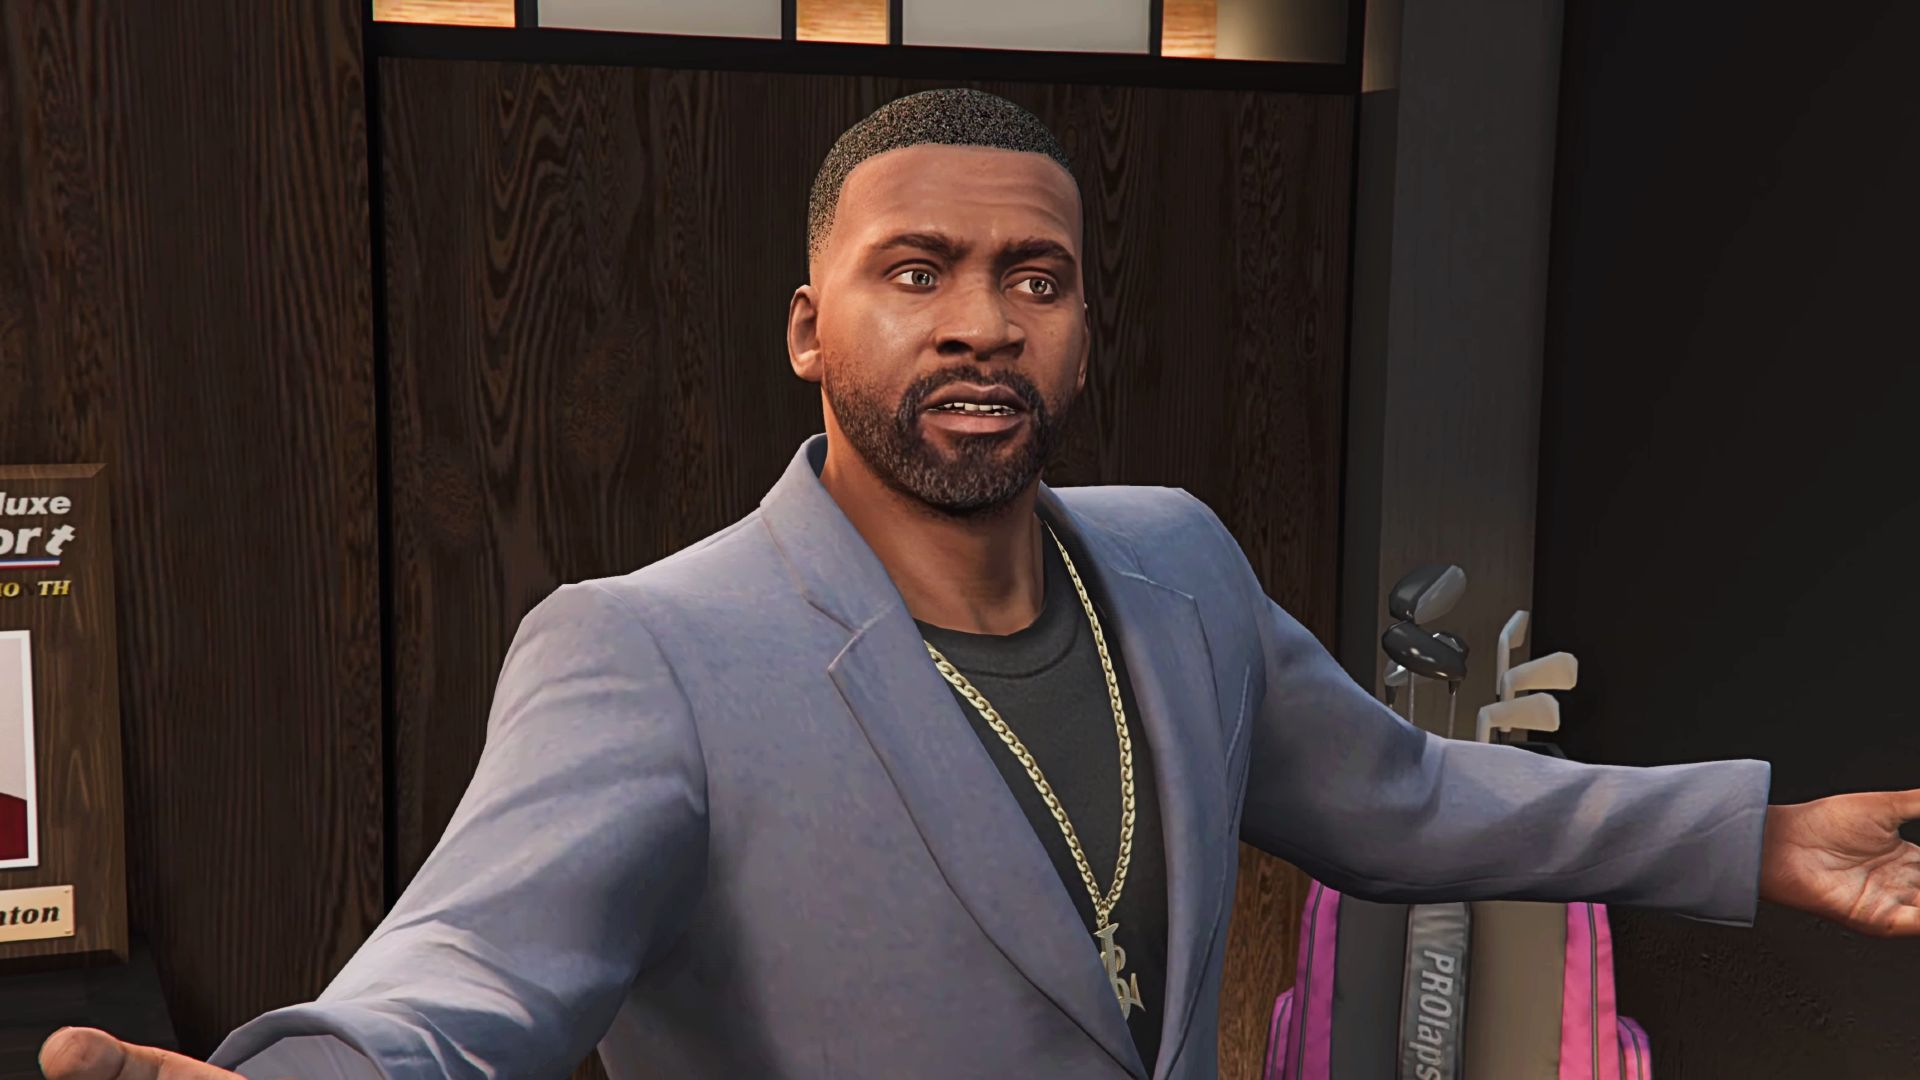 GTA 5 PC - Play as your Multiplayer Character in Single Player! 